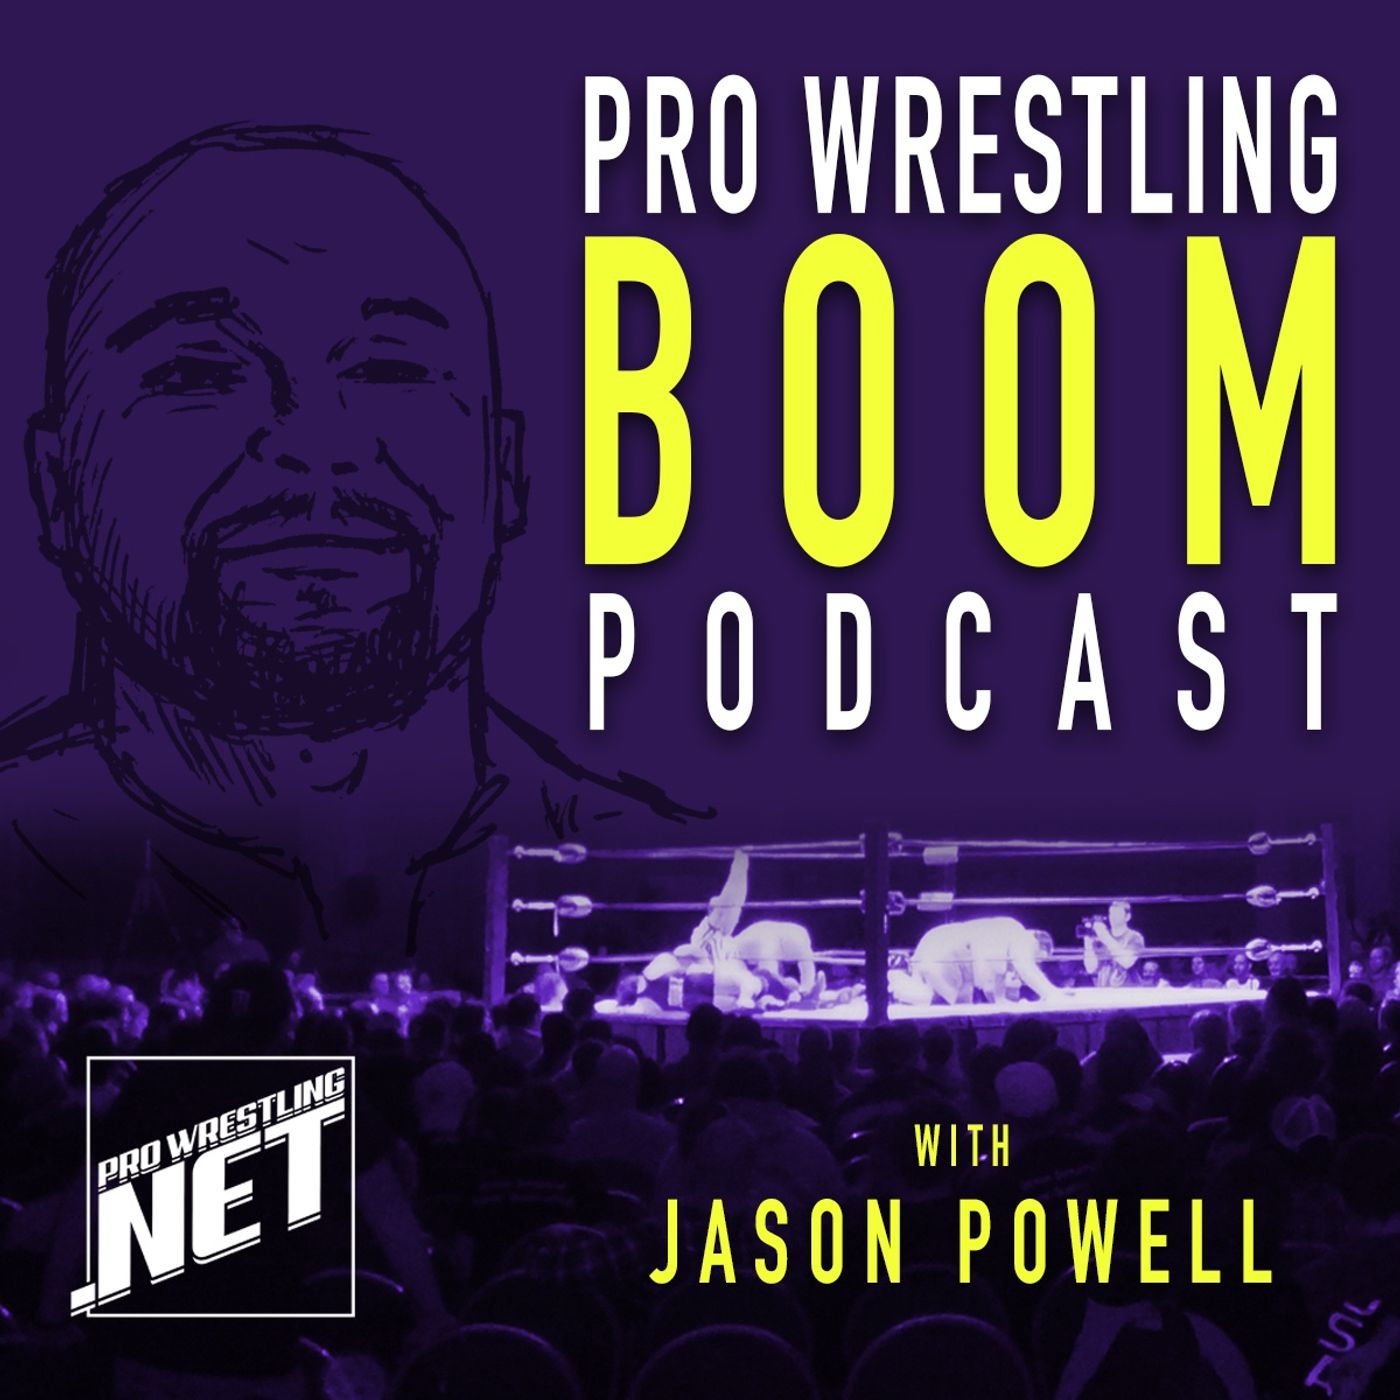 07/02 Pro Wrestling Boom Podcast With Jason Powell (Episode 117): Jake Barnett co-hosts the Dot Net Weekly combo show